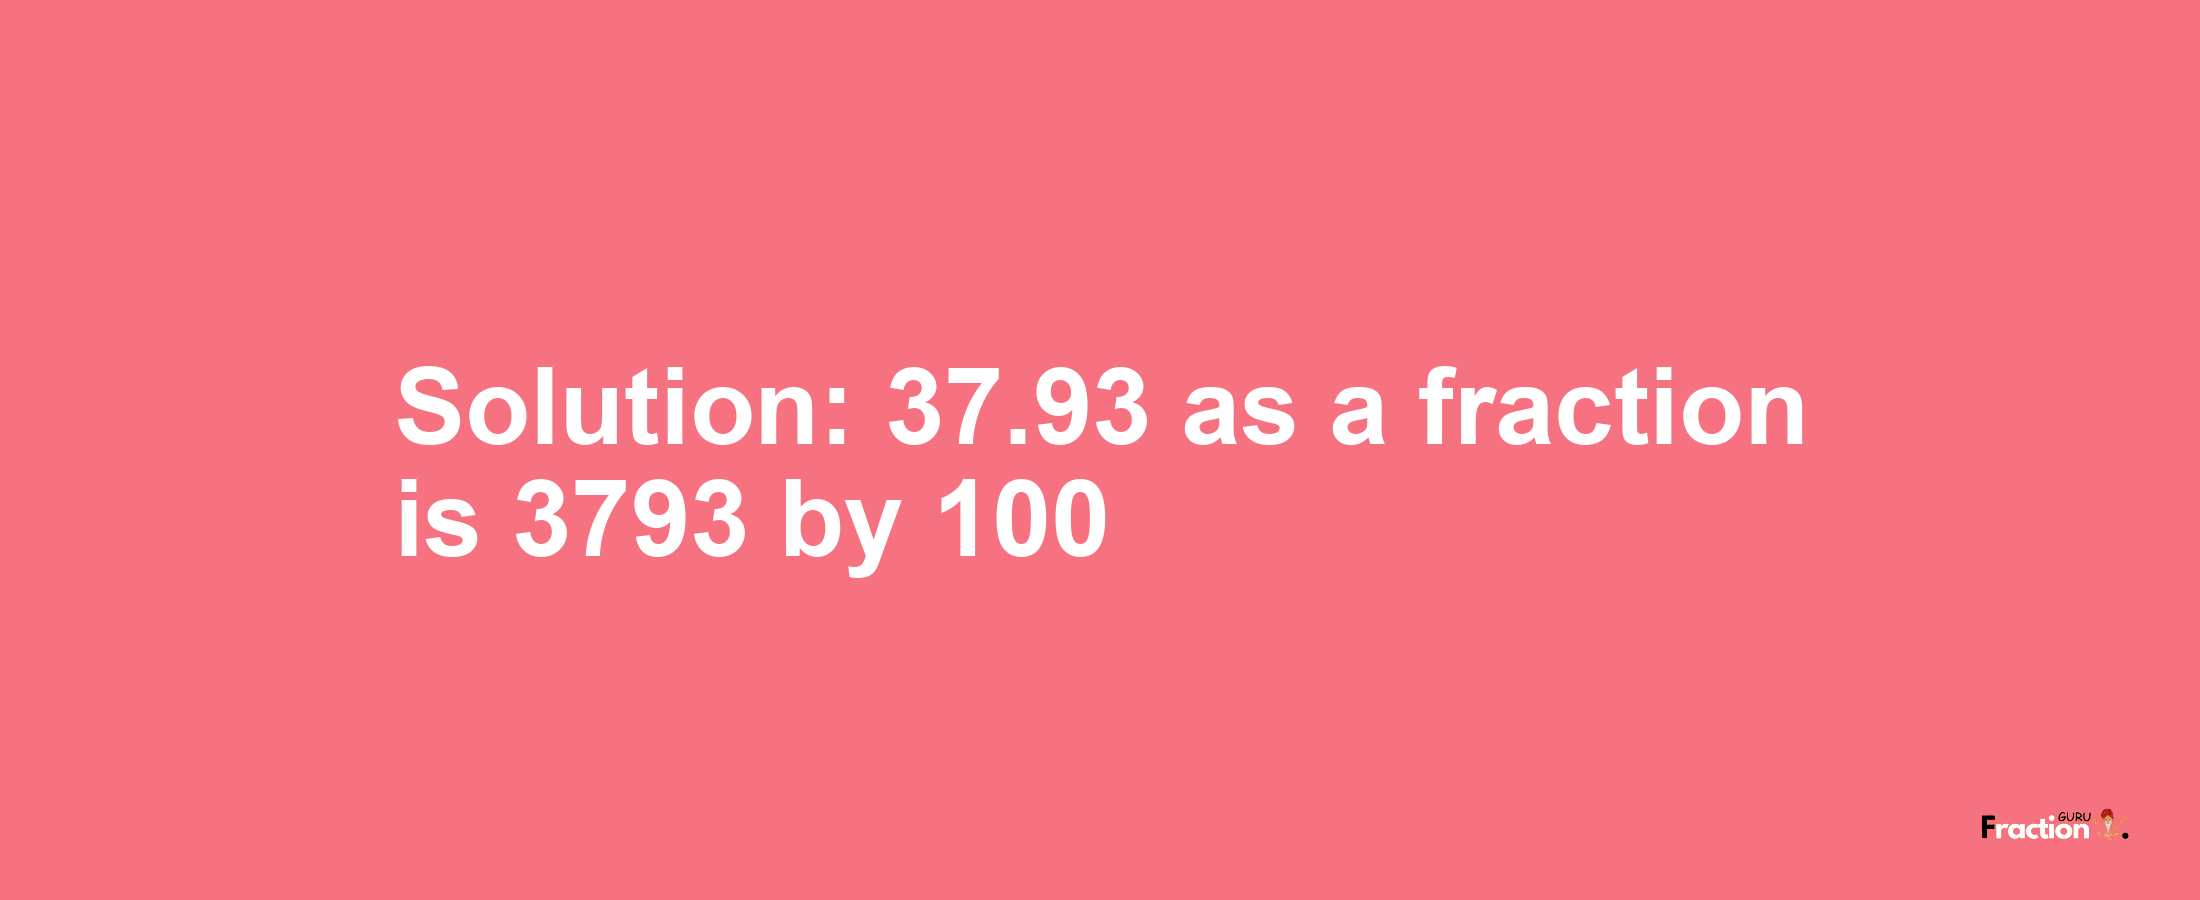 Solution:37.93 as a fraction is 3793/100